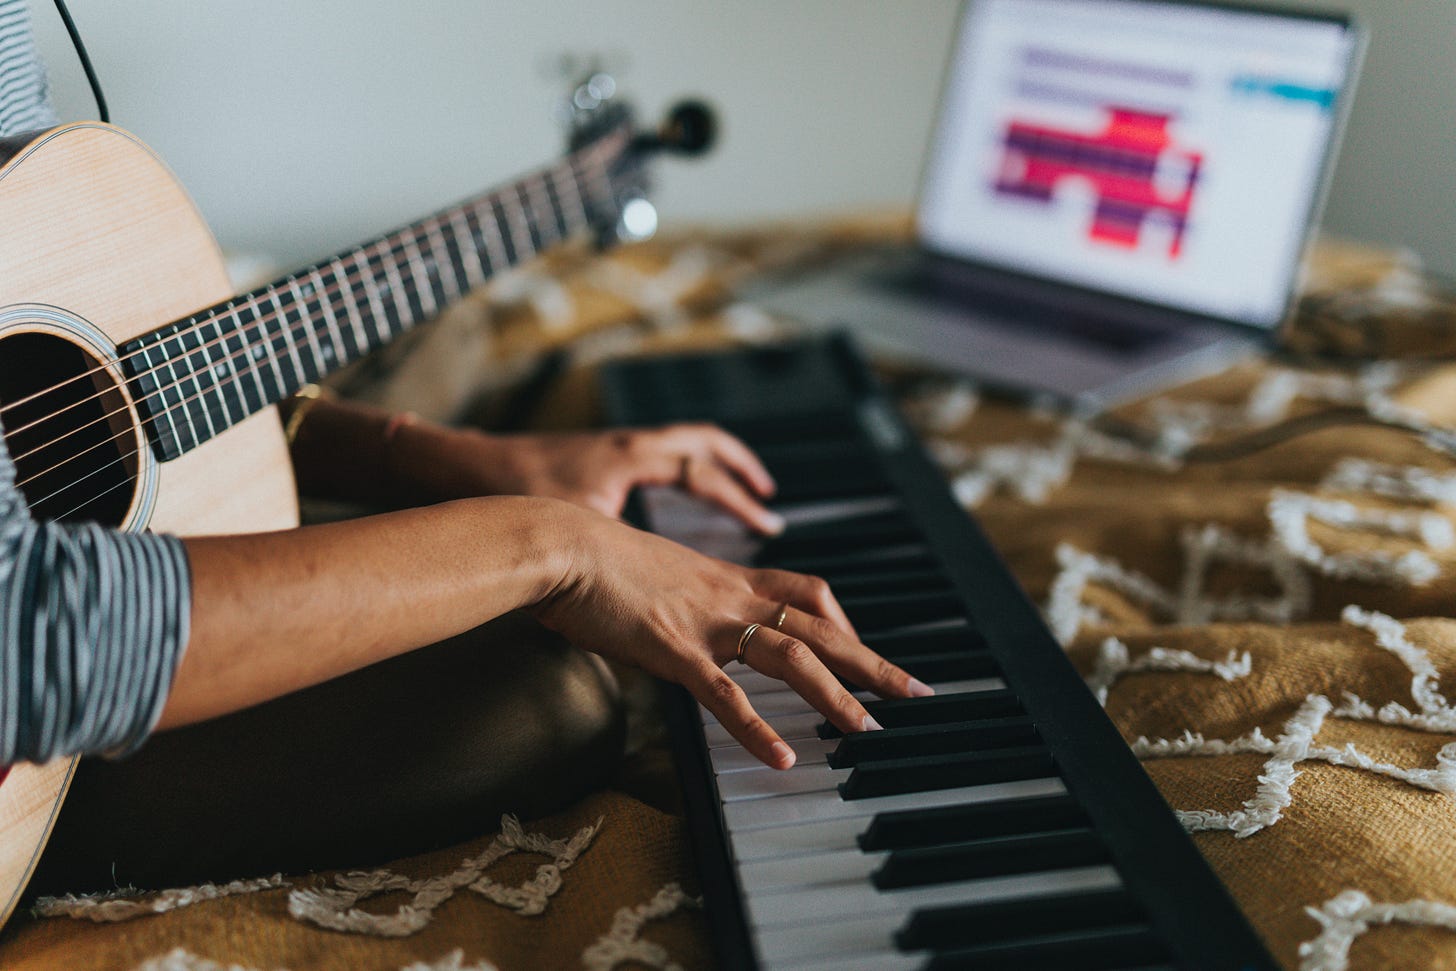 A person playing guitar and piano.